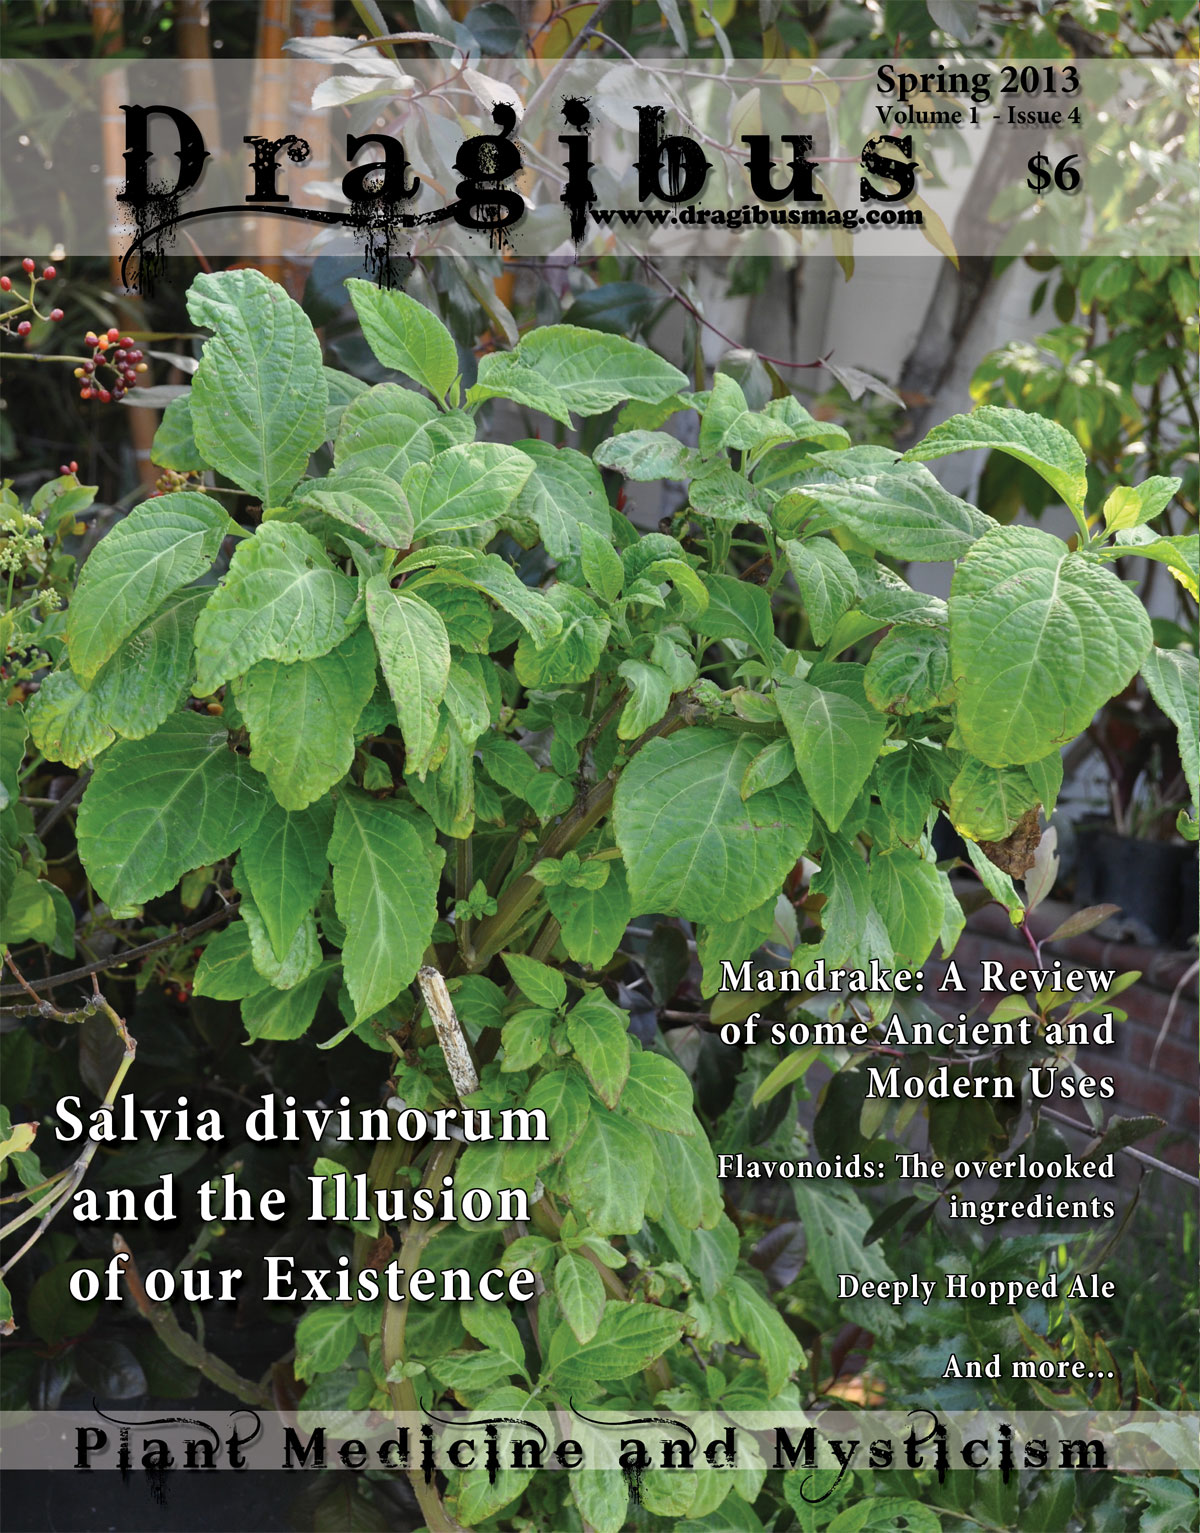 Dragibus Magazine - Salvia divinorum, Ancient and Modern uses of Mandrake, a look at Flavonoids, Deeply Hopped Ale and more…